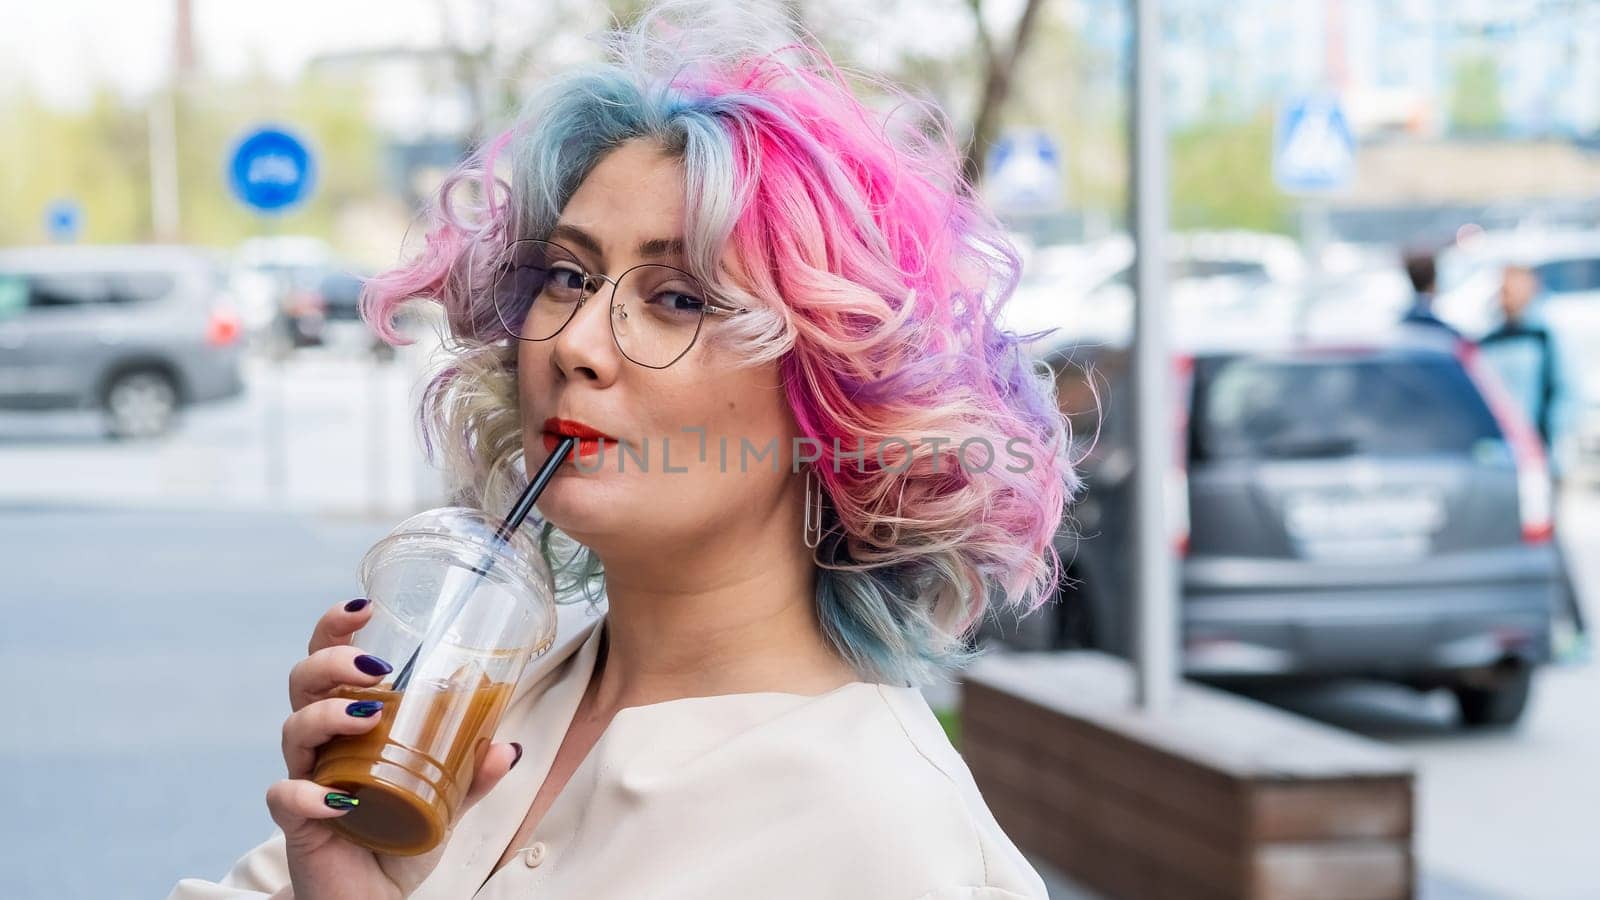 Close-up portrait of curly Caucasian woman with multi-colored hair wearing glasses. The hairstyle model is drinking a cold drink